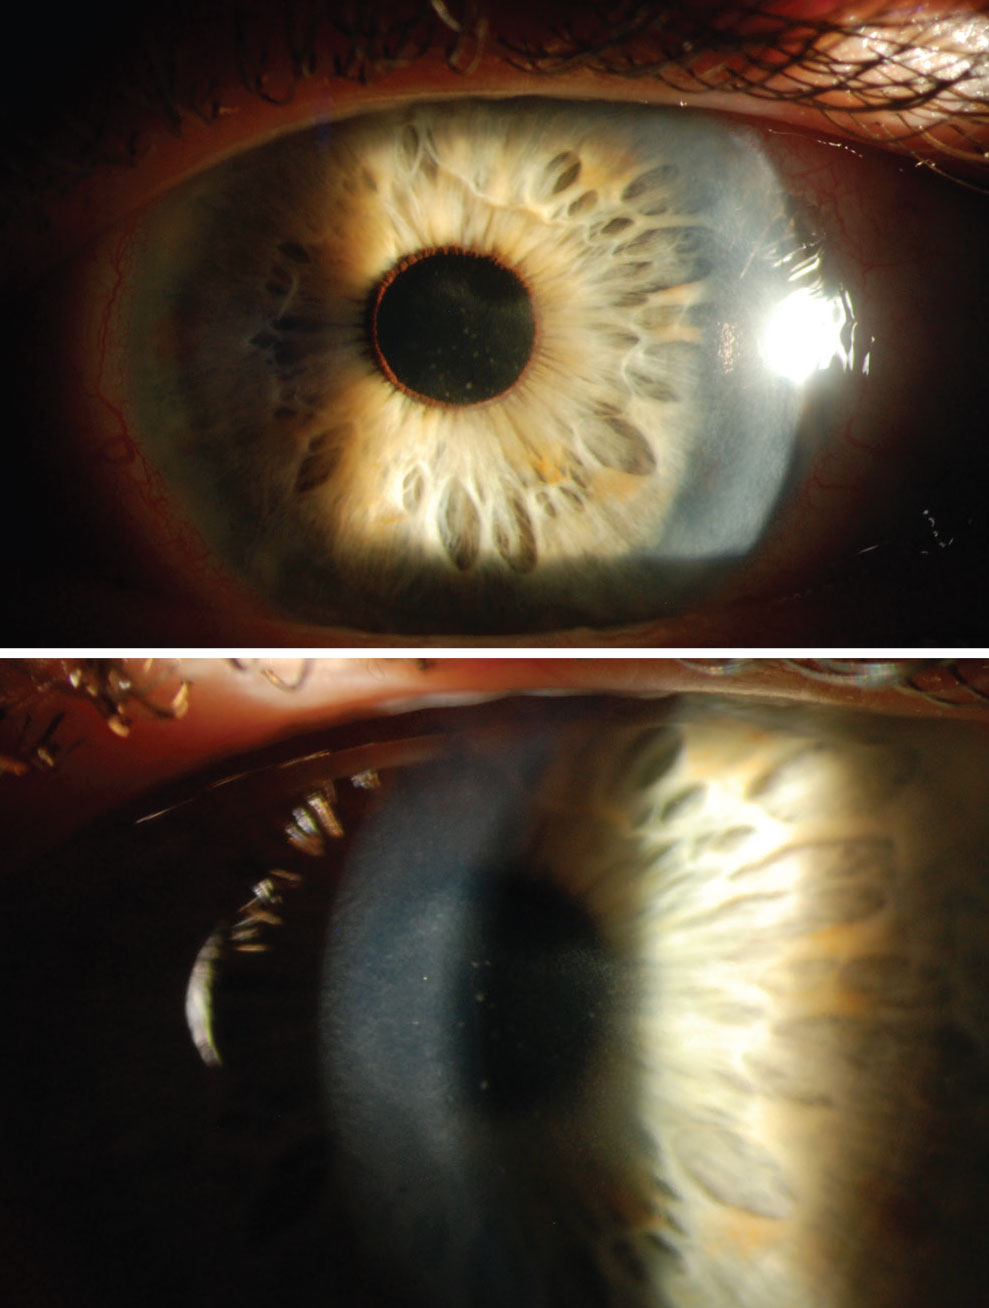 The patient presenting with nummular stromal keratitis caused by HZO.